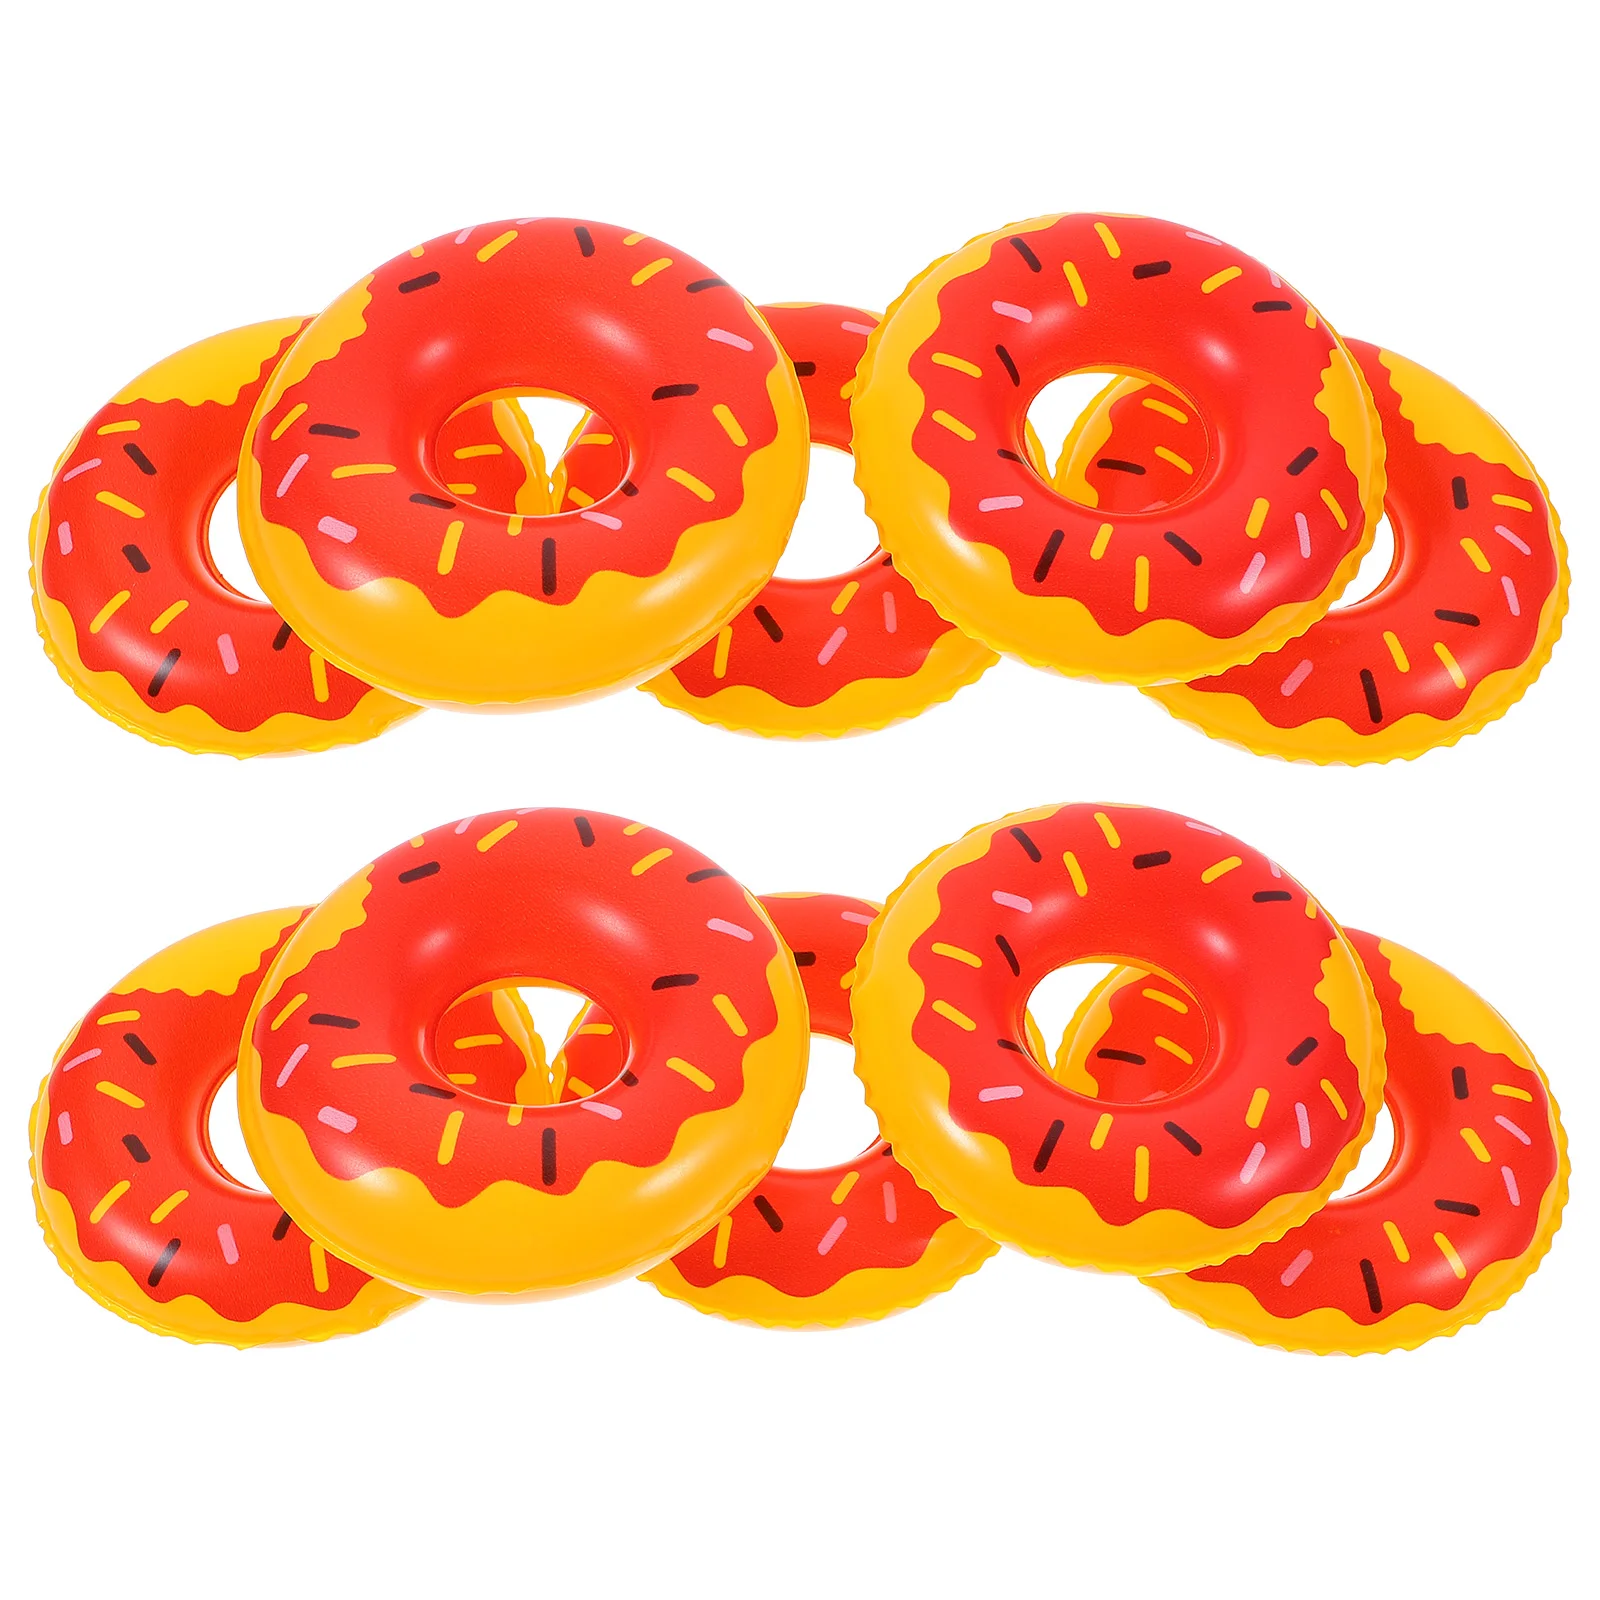 

Mini Swimming Ring Donut Pool Inflatable Floats Doughnut Swimming Rings Inflatable Cup Coasters Inflatable Tubes Floaties Summer